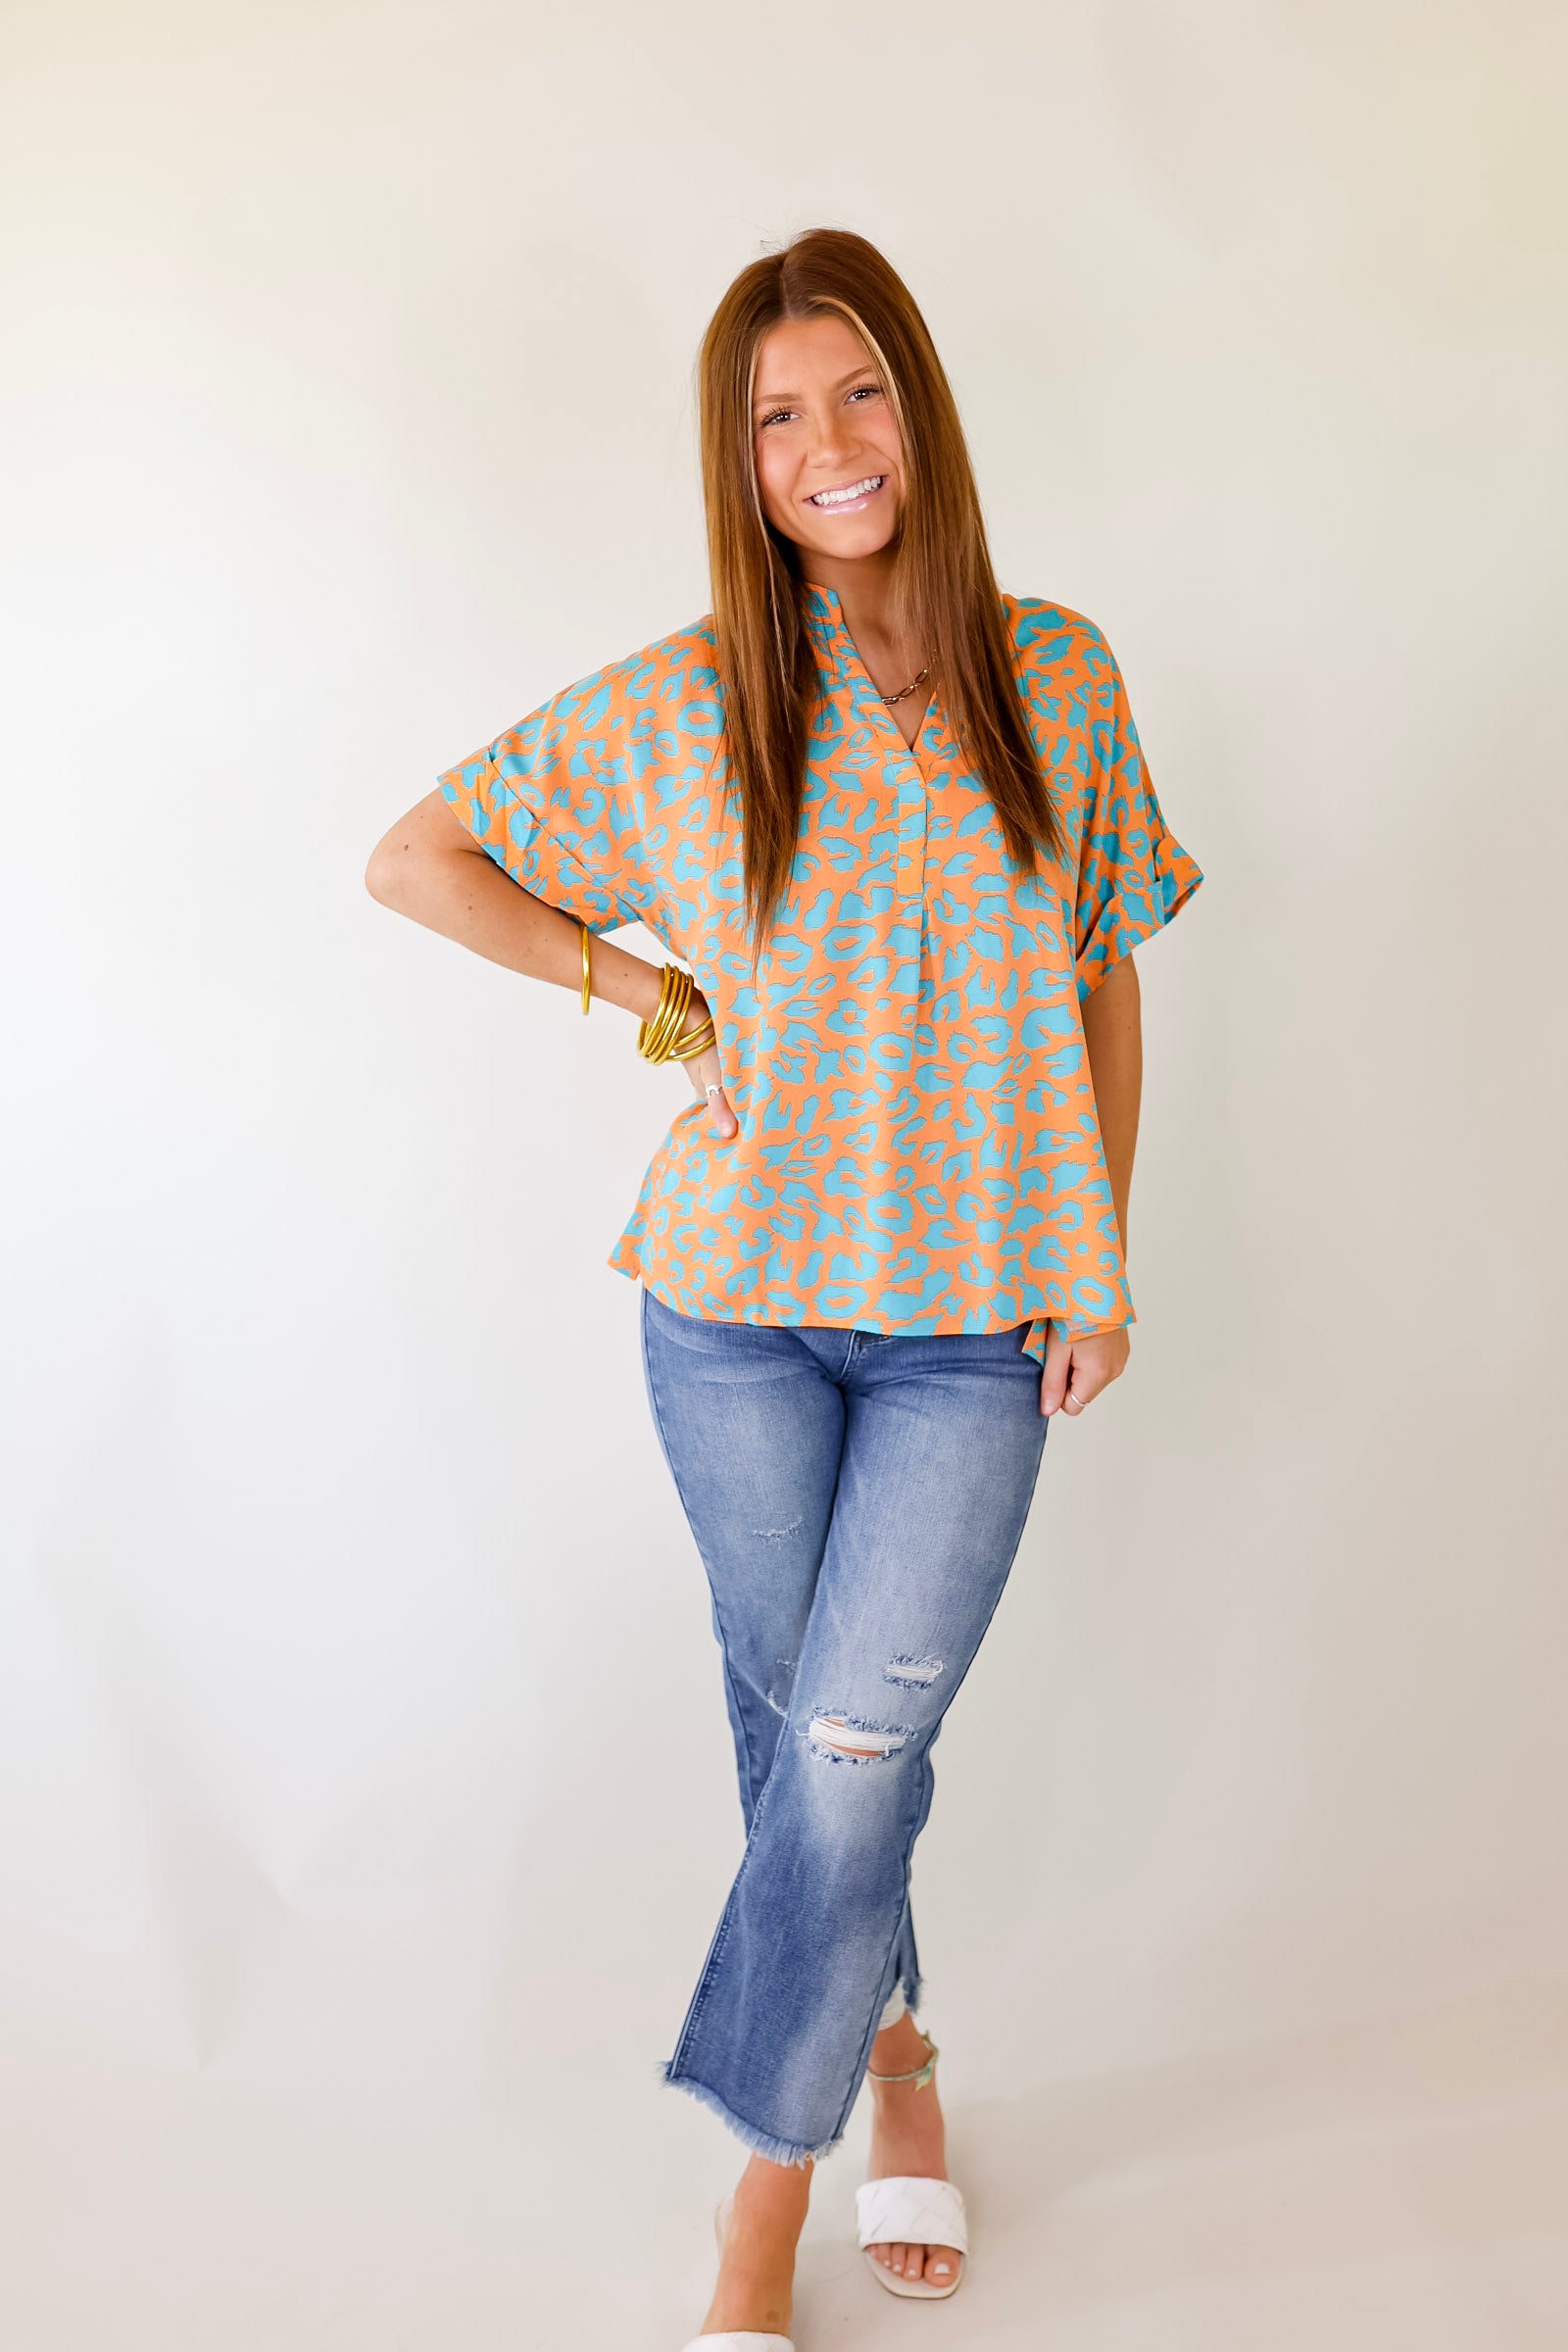 Bold and Beautiful V Neck Teal Leopard Print Top in Orange - Giddy Up Glamour Boutique